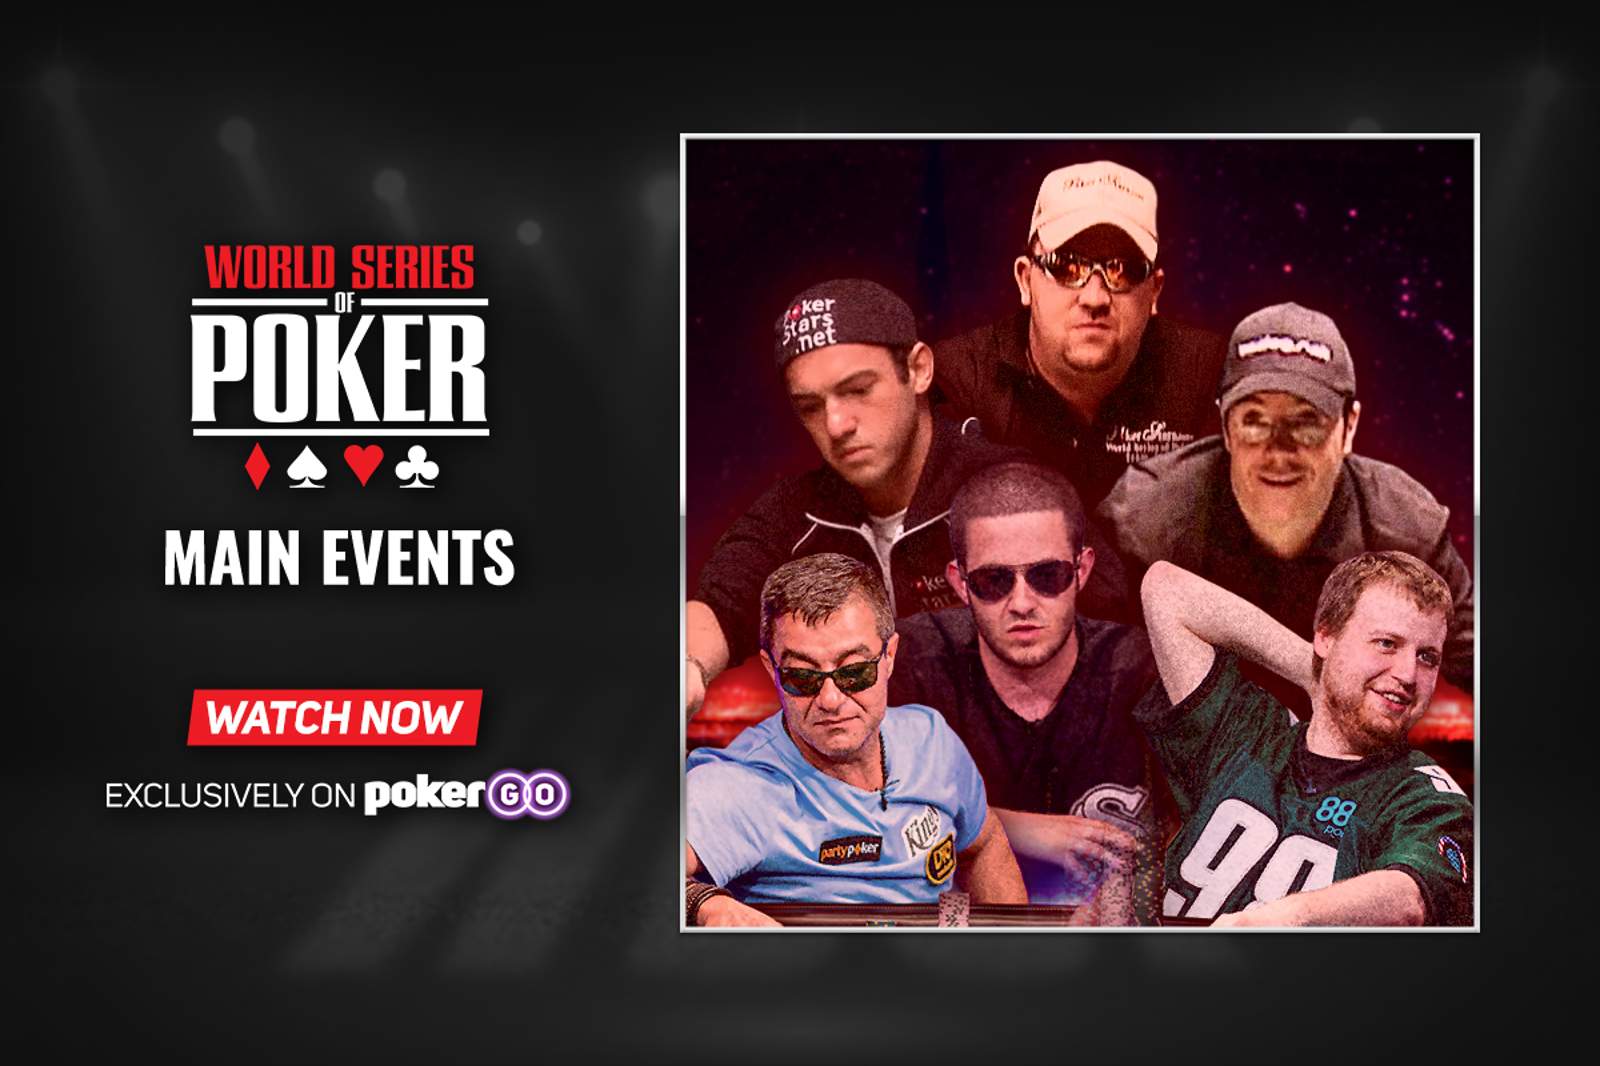 Watch the Entire WSOP Main Event Collection on PokerGO